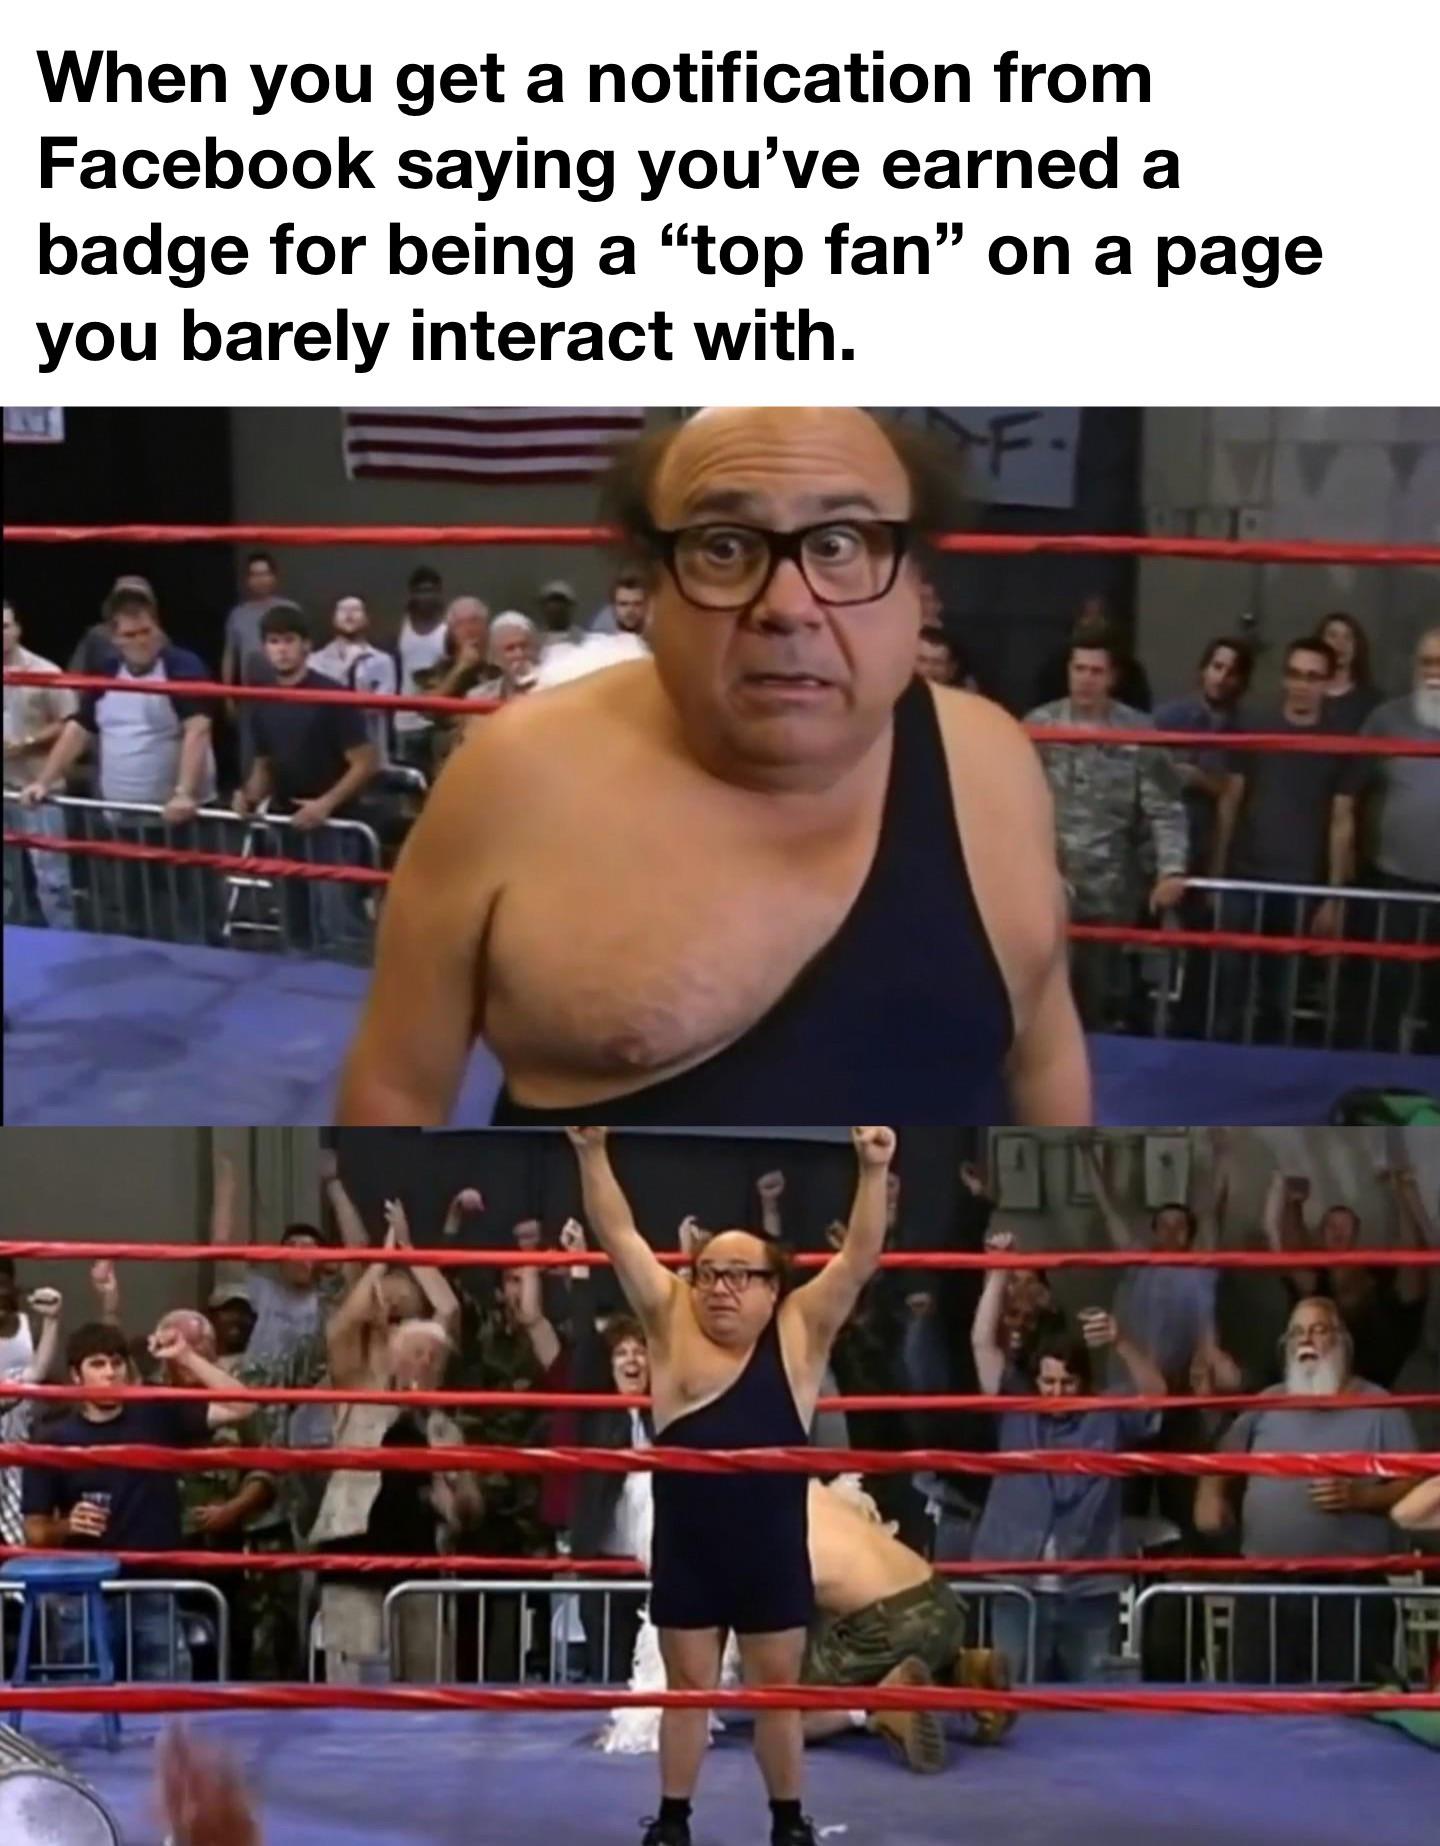 Dank Memes - wrestler meme always shnny - When you get a notification from Facebook saying you've earned a badge for being a